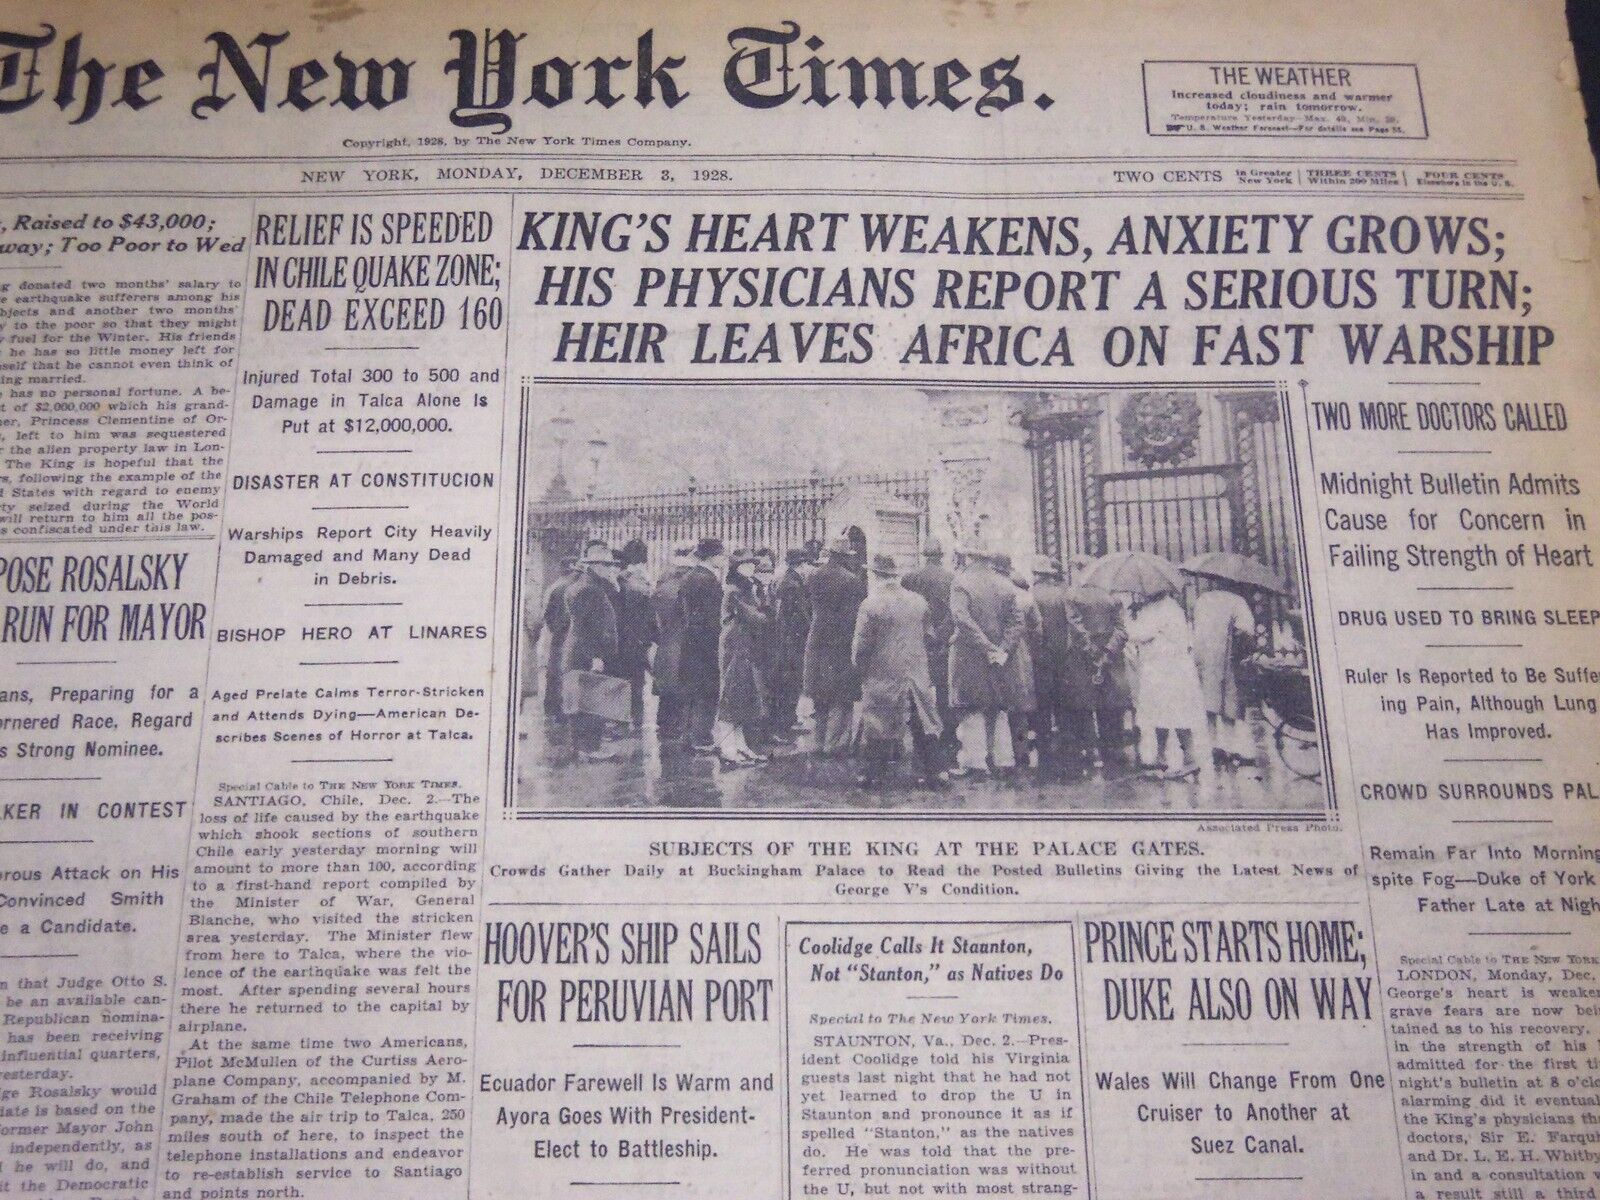 1928 DEC 3 NEW YORK TIMES - KING'S HEART WEAKENS, ANXIETY GROWS - NT 5120